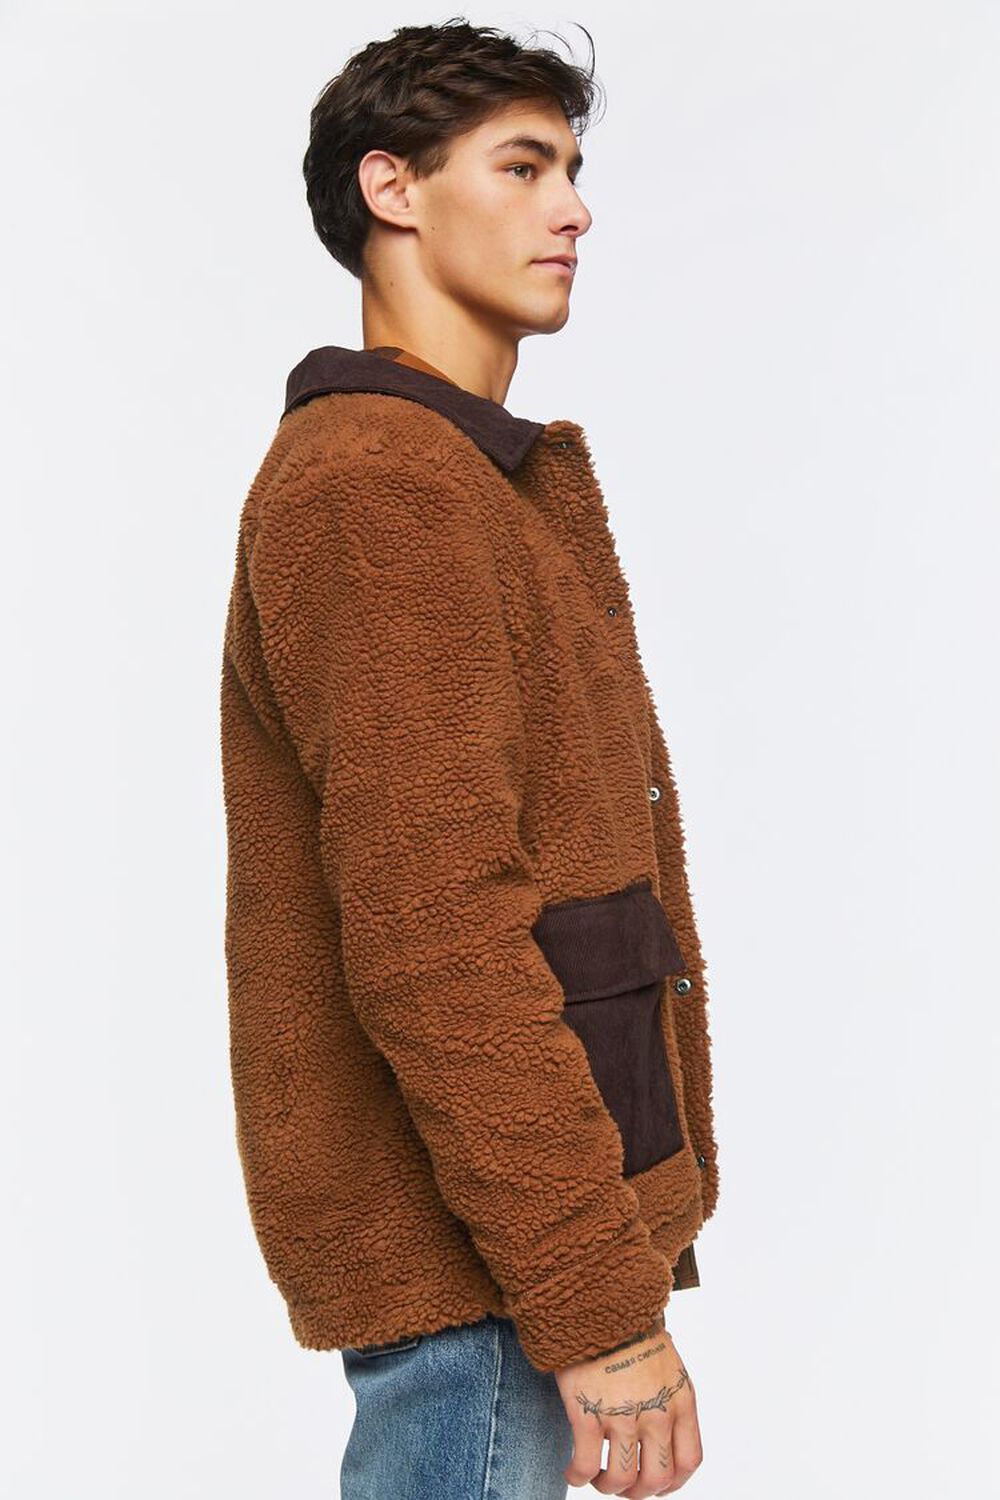 BROWN Faux Shearling Snap-Button Jacket, image 2